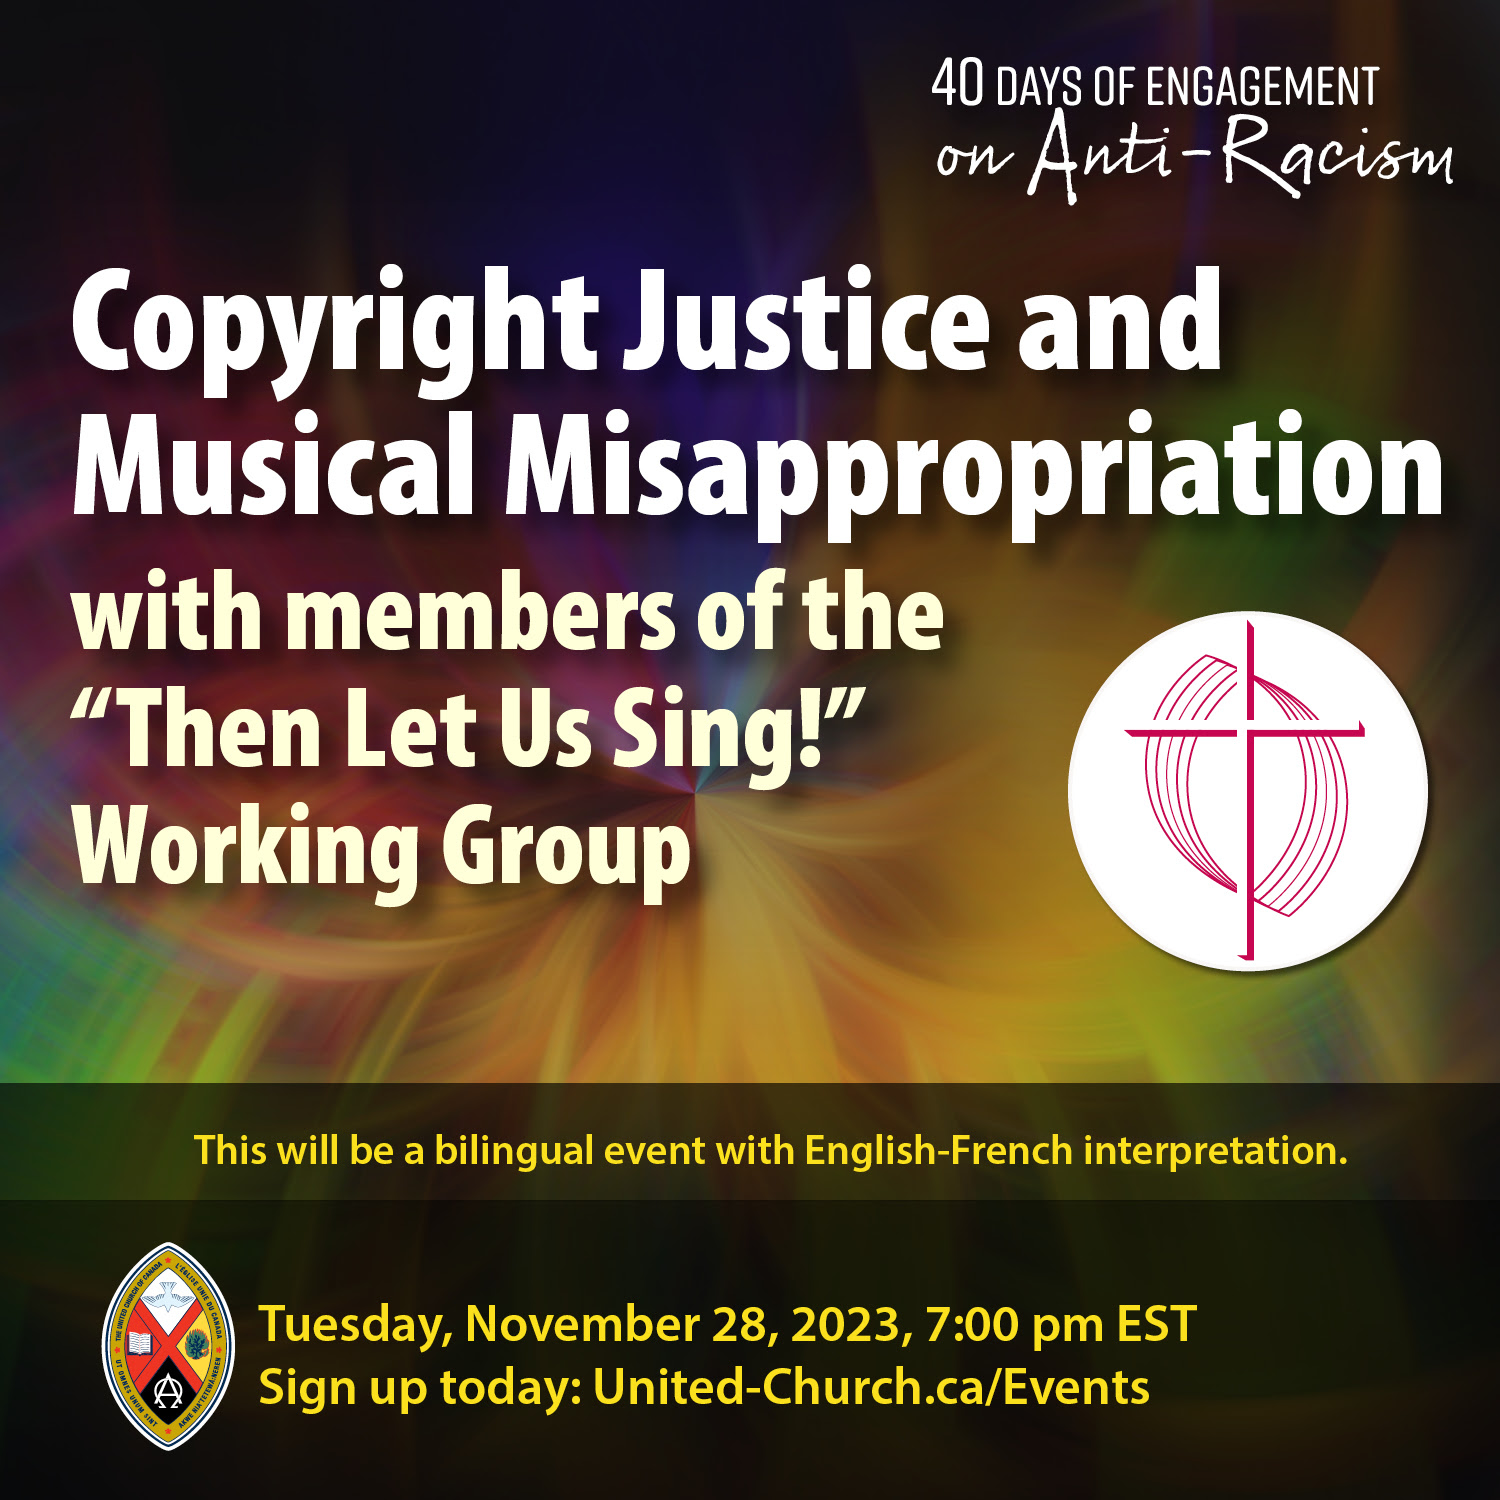 Copyright Justice and Musical Misapporpriation with members of the "Then Let Us Sing!" Working Group